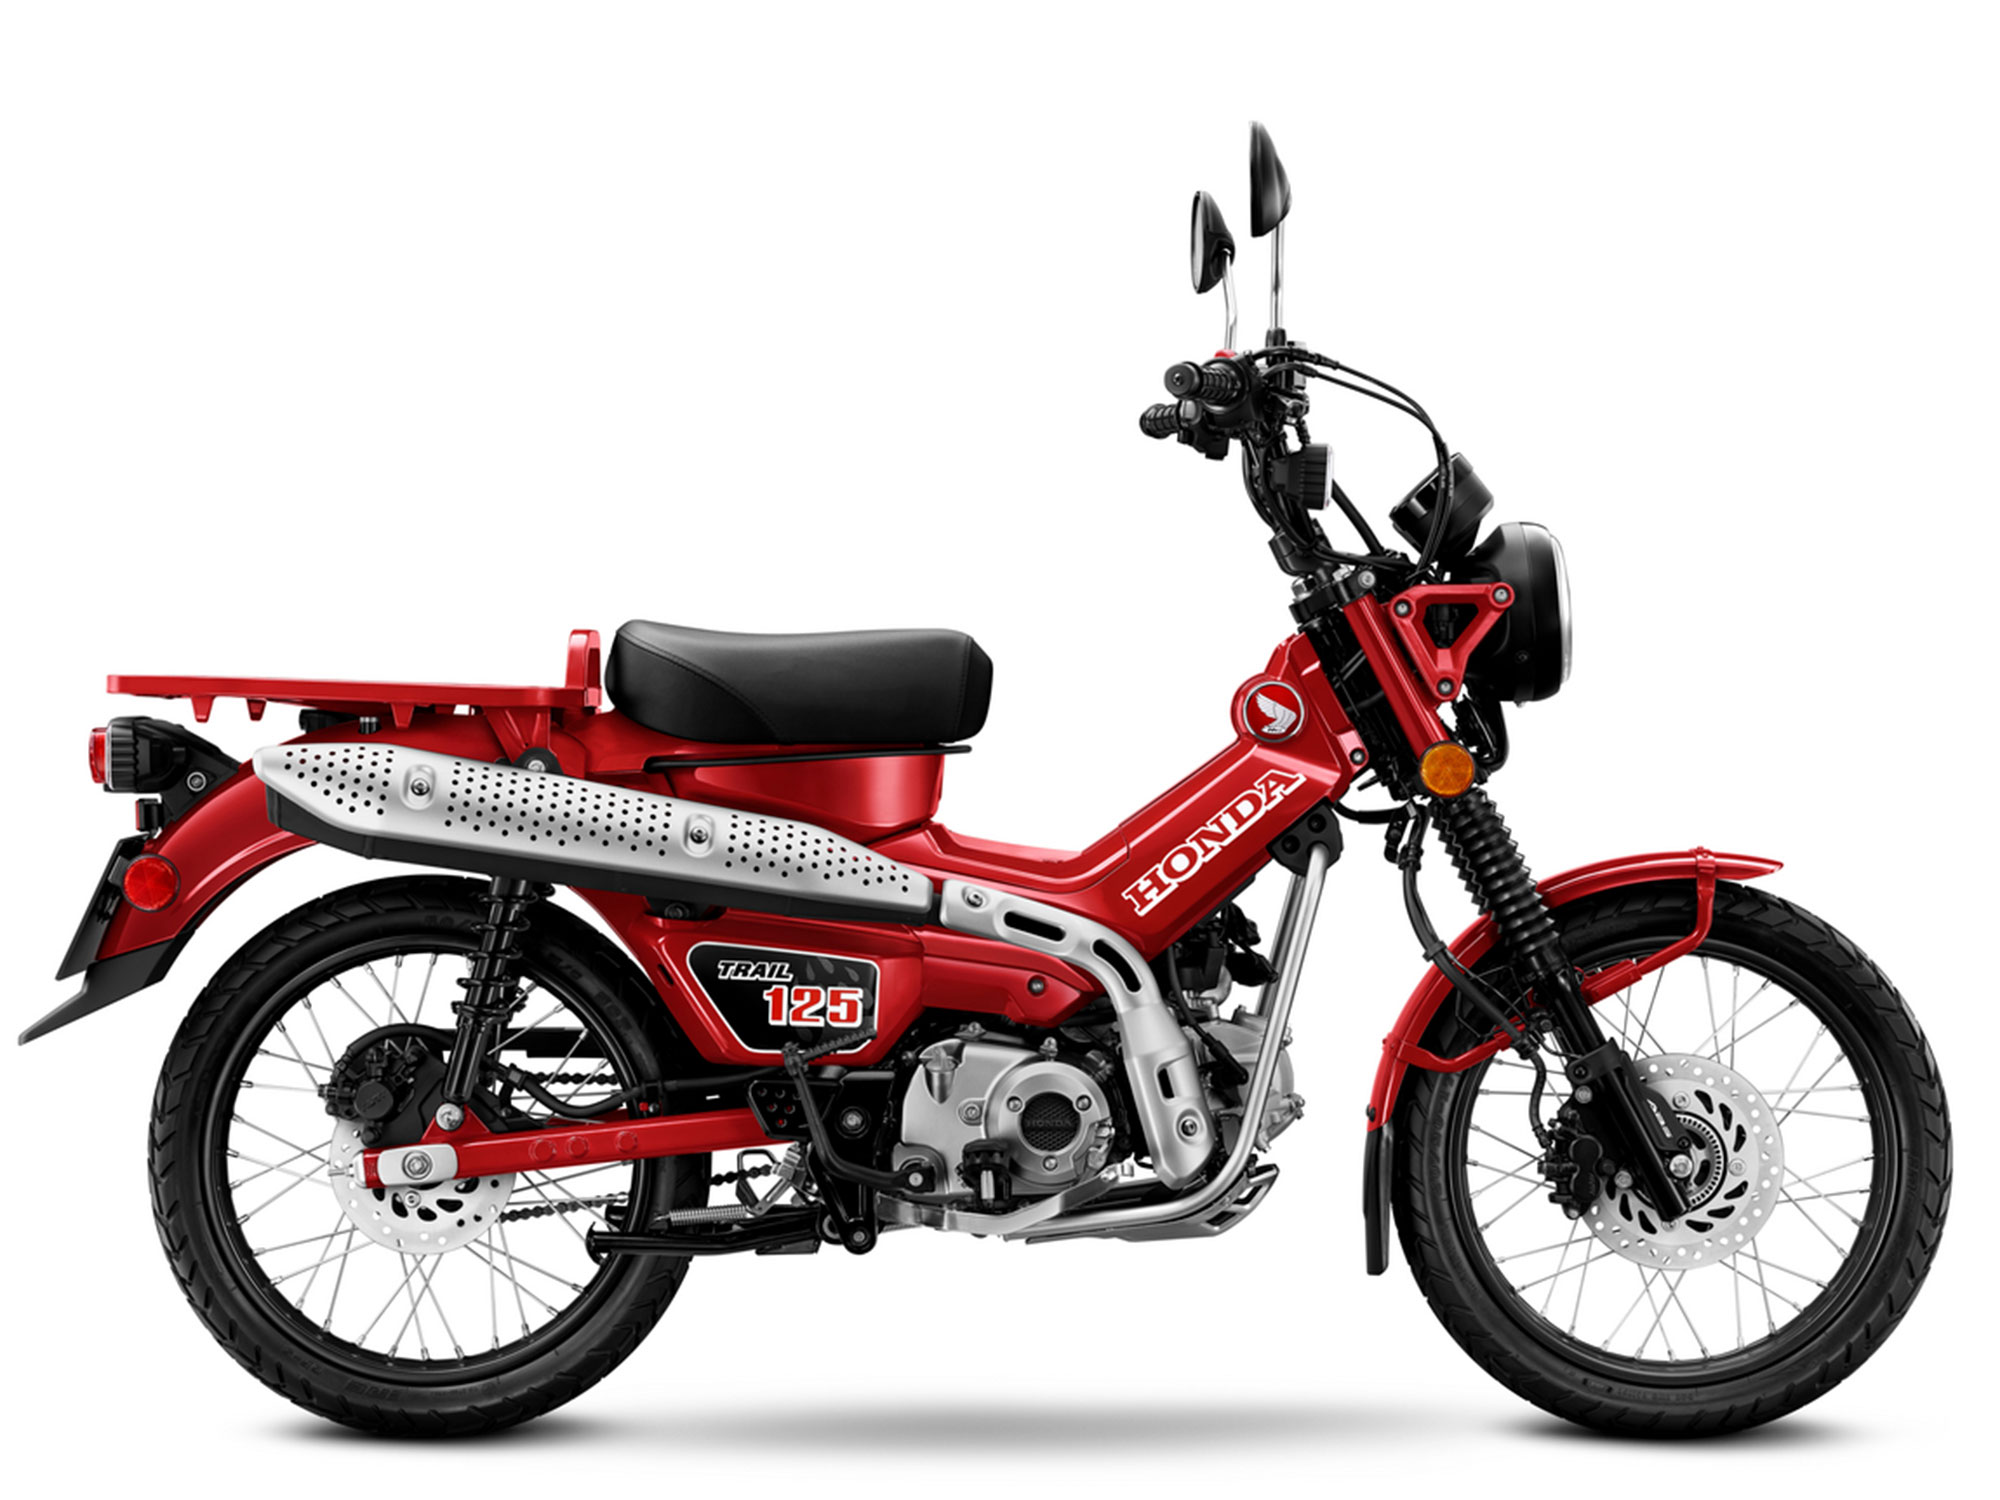 1981 Honda CB 125 T 2 specifications and pictures